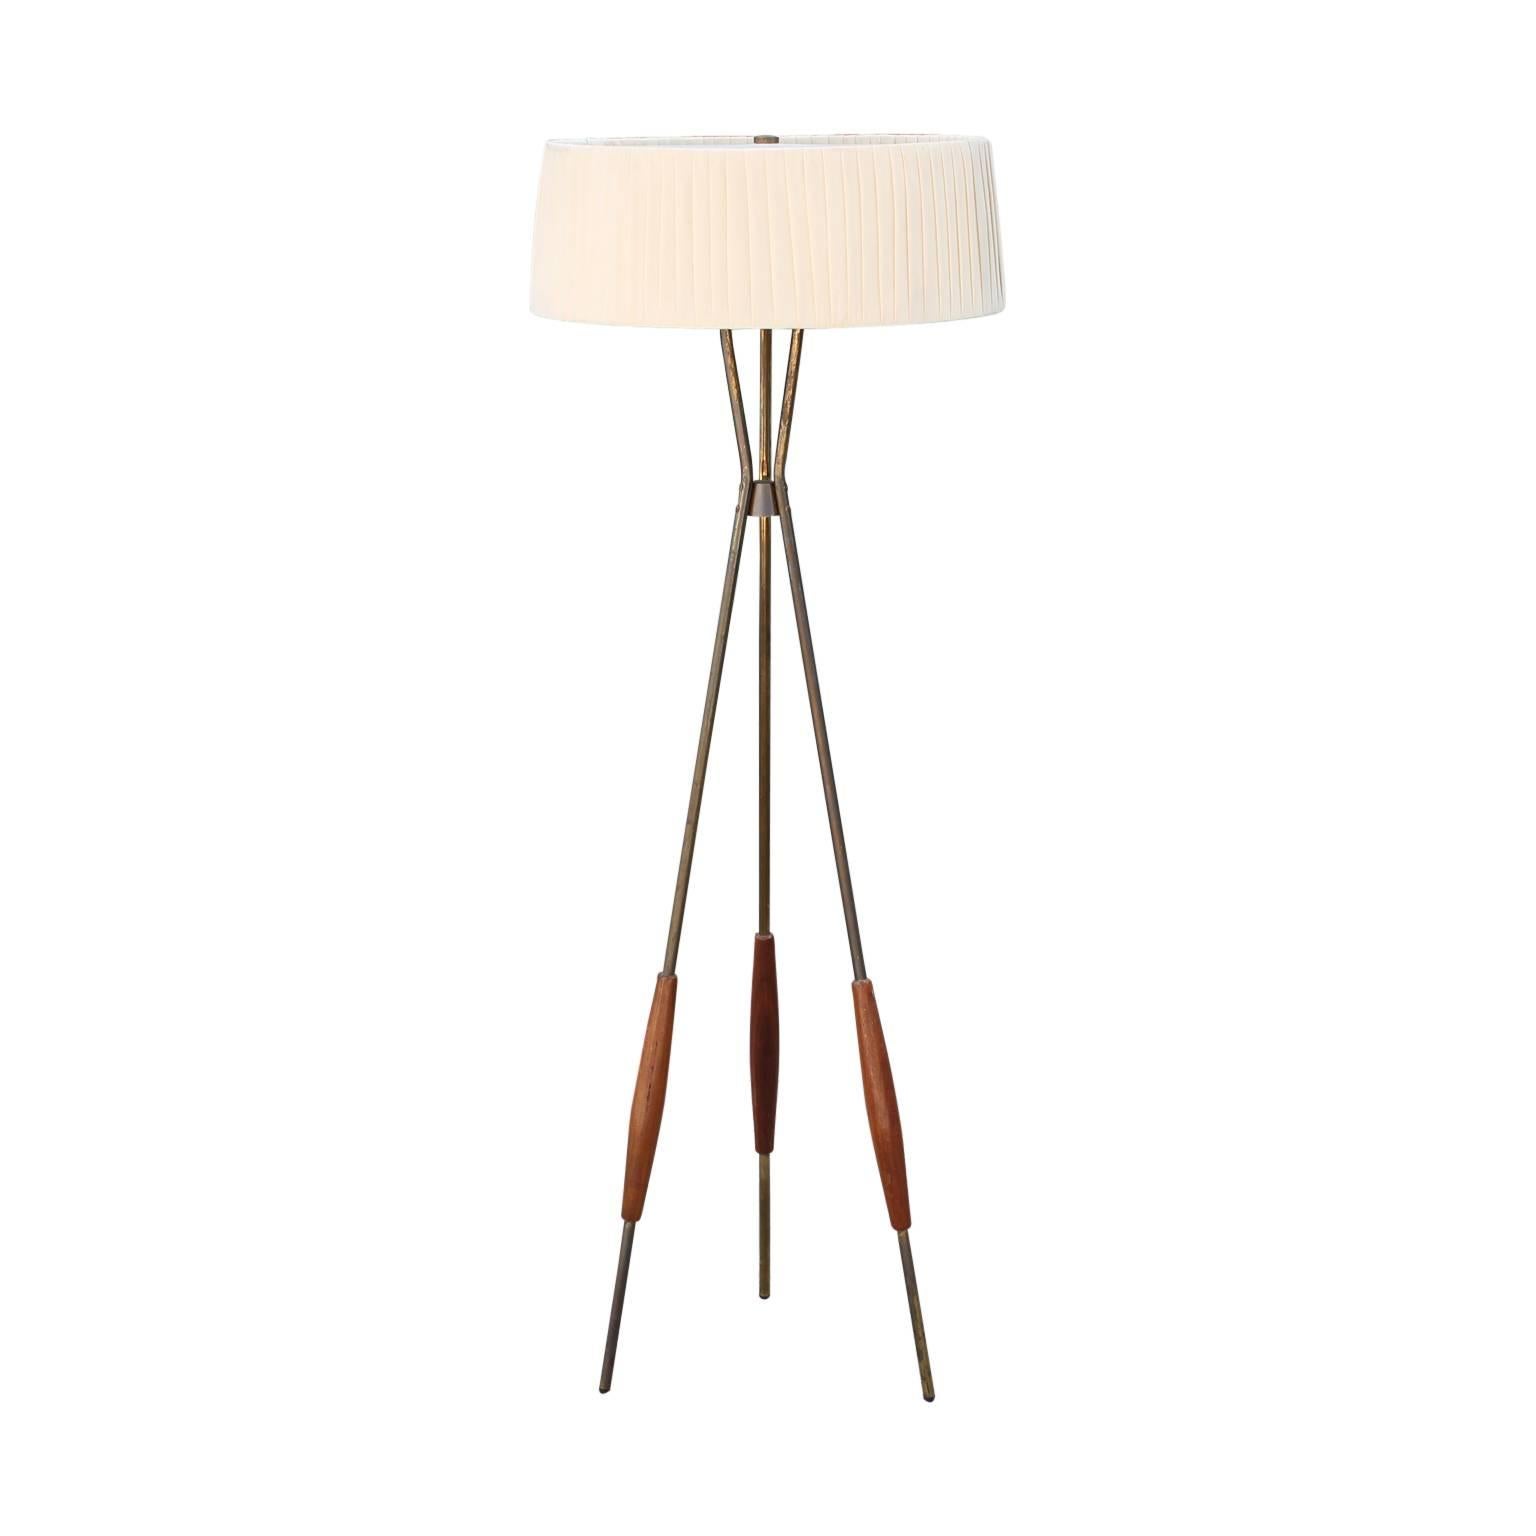 Mid-Century Modern tripod floor lamp by Gerald Thurston for Lightolier, circa 1950s. This piece features brass legs with solid walnut sleeves at the bottom of each leg and its original lampshade with a perforated metal diffuser and plastic bulb